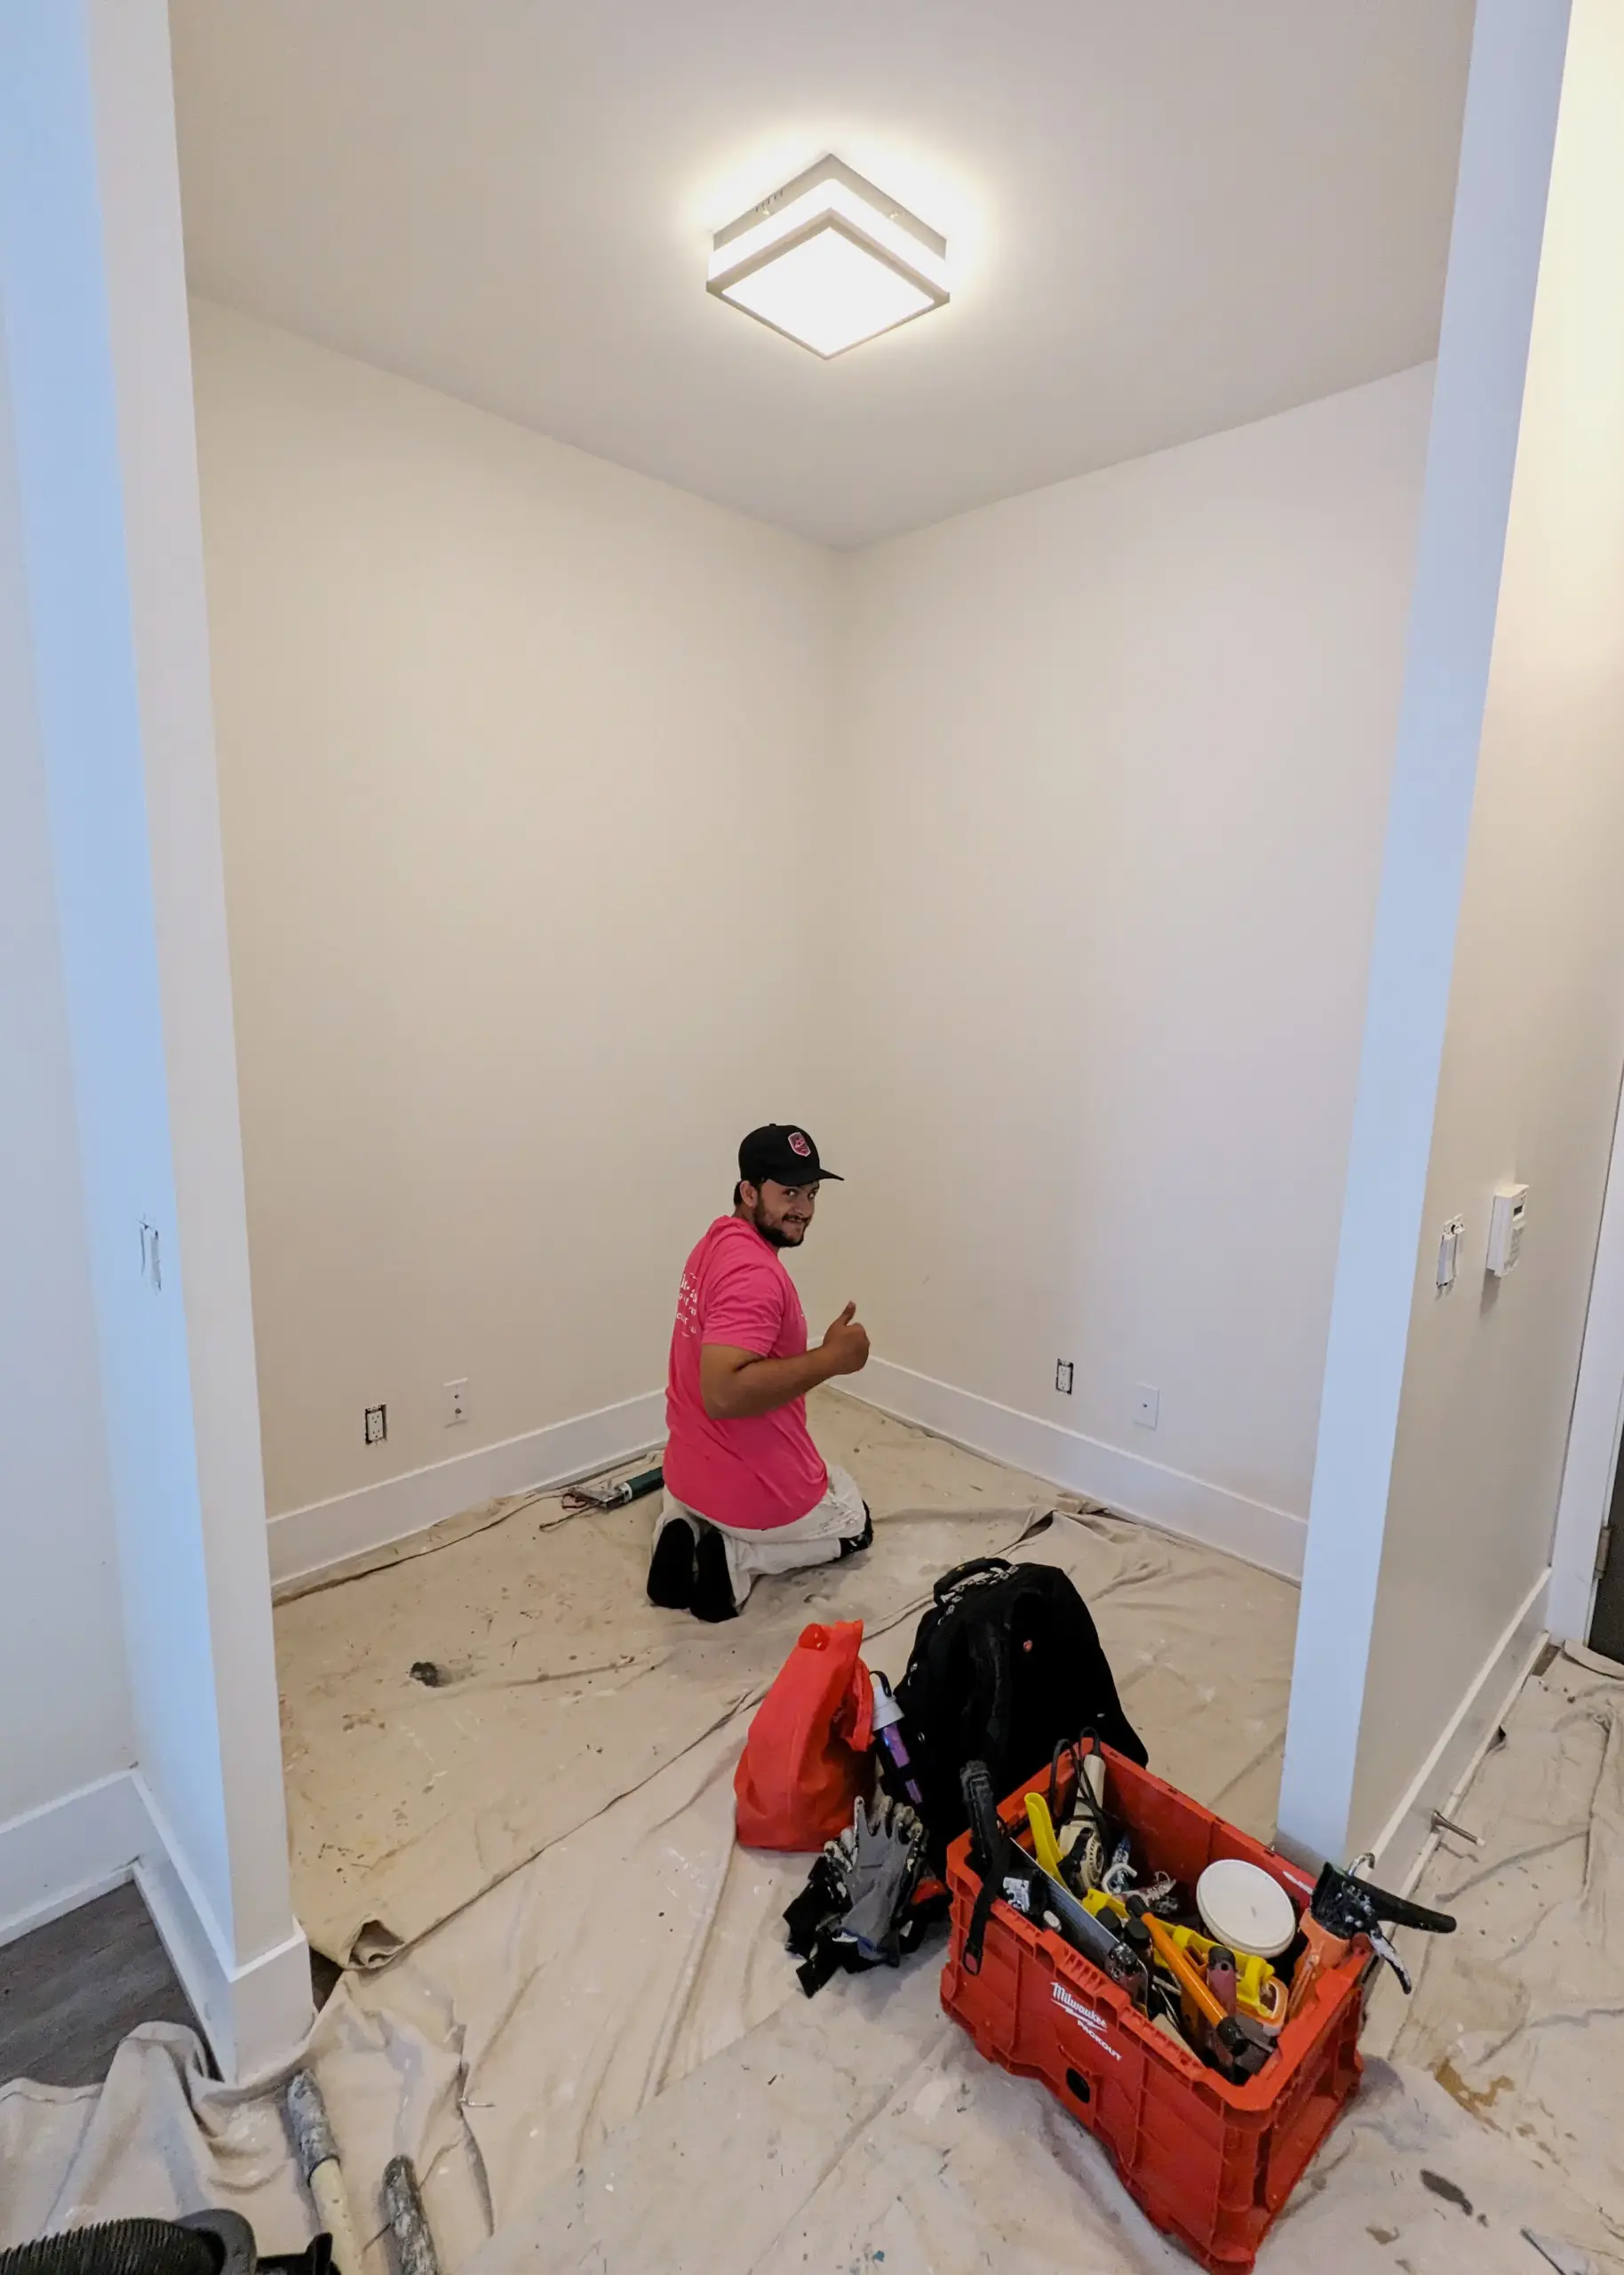 Toronto condo painters, Chromatist Painter at work, adding a touch of modern elegance to a downtown condo to prepare for the next condo owner to move in.